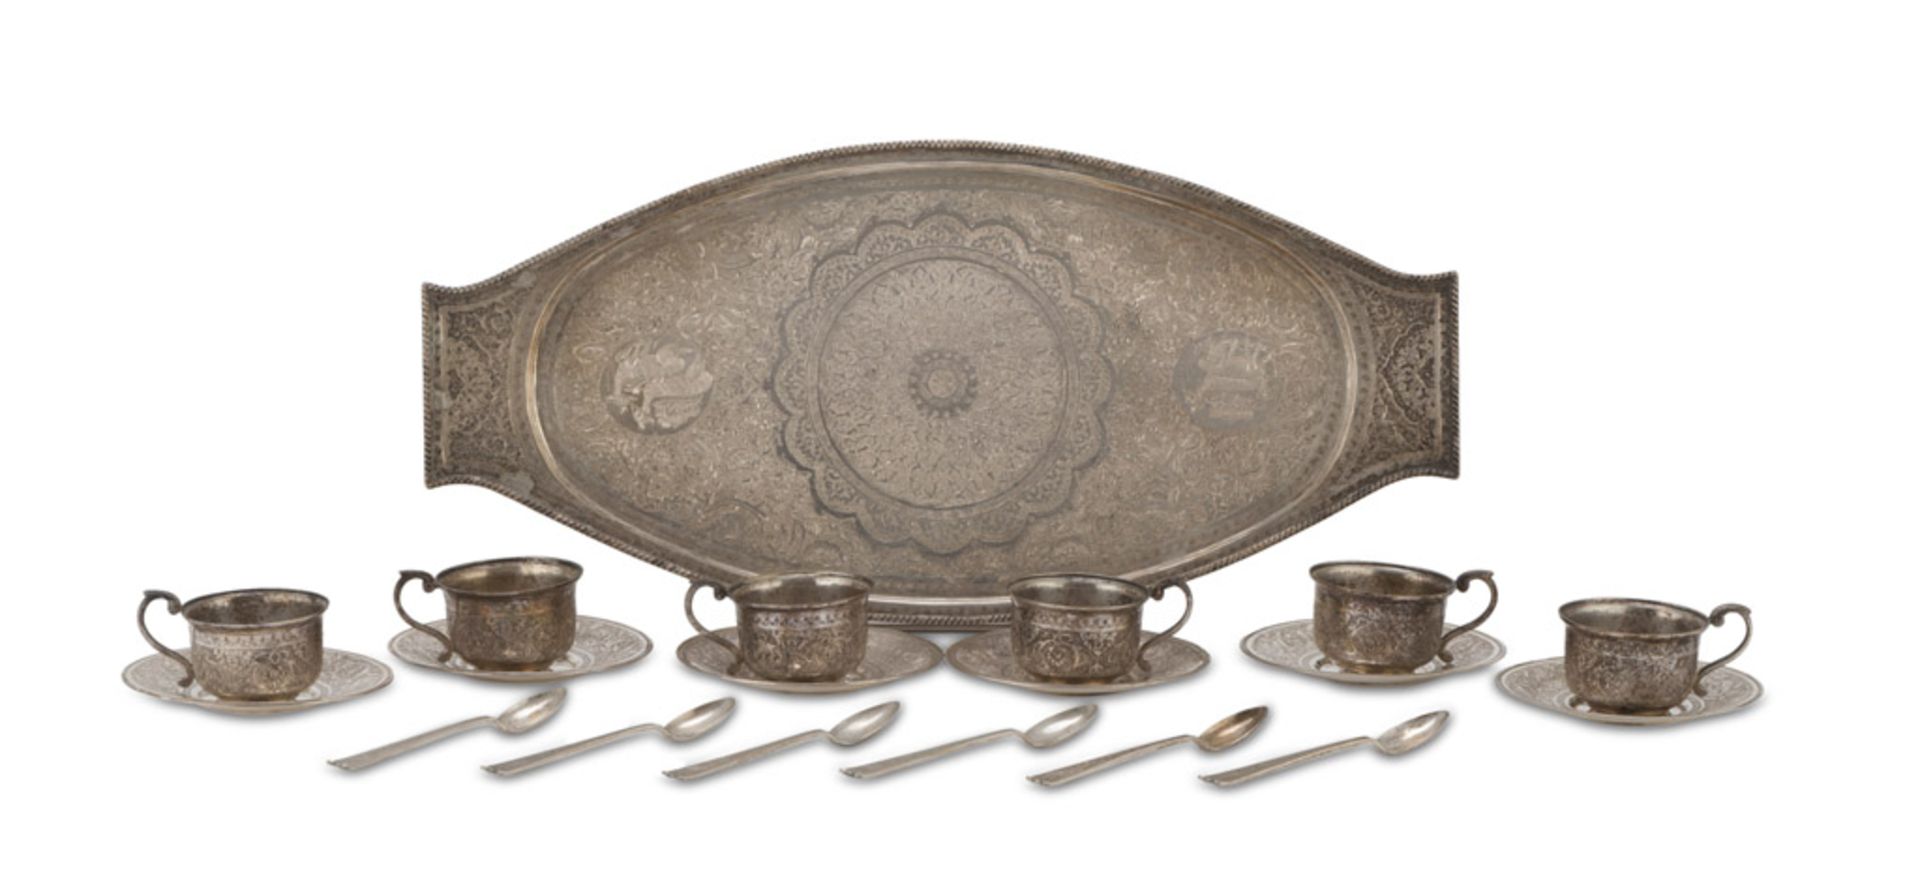 TEA SERVICE IN SILVER, MIDDLE EAST, EARLY 20TH CENTURY Consisting of six cups with saucers, six